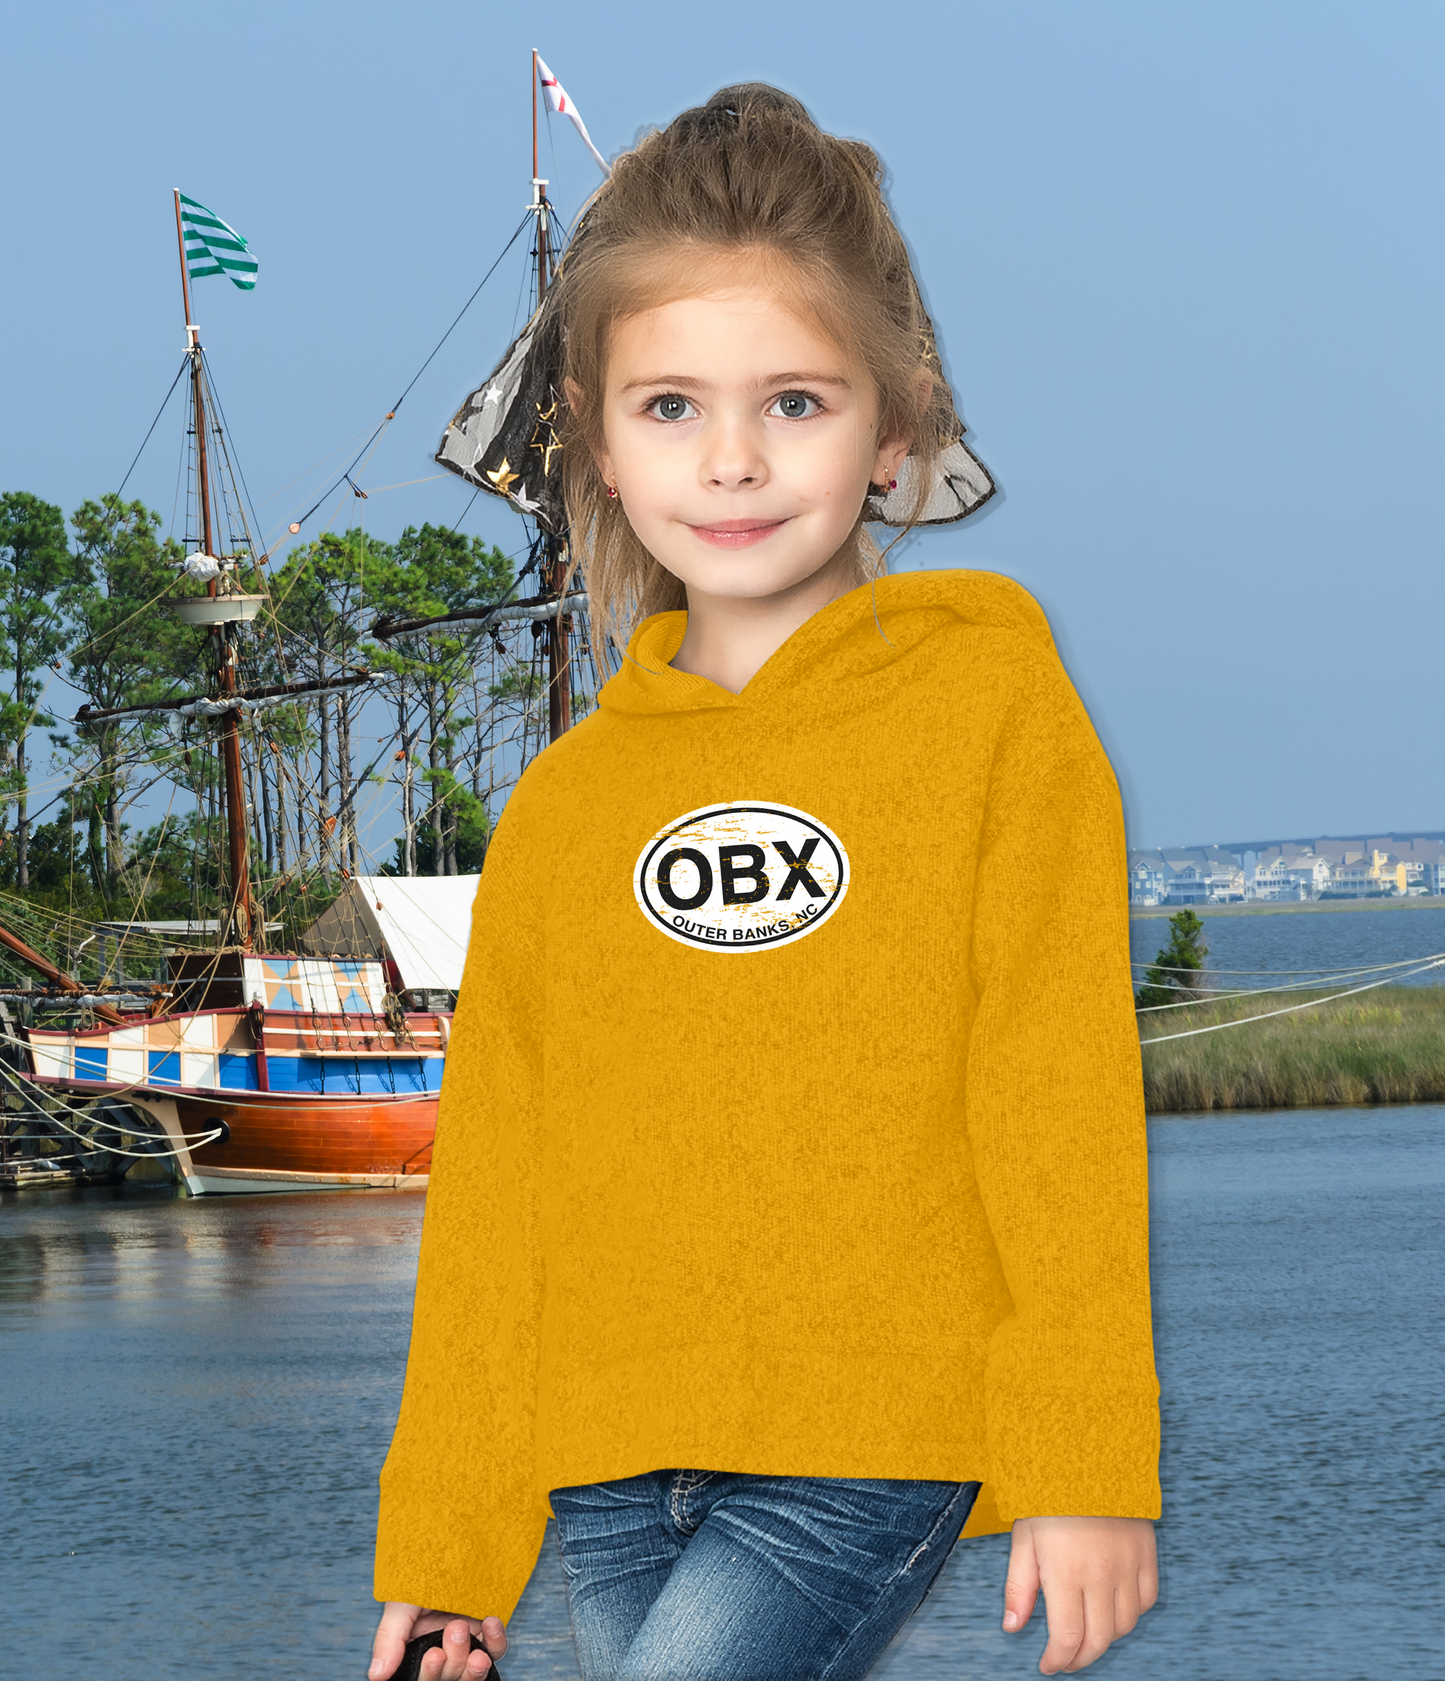 Outer Banks Classic Youth Hoodie Souvenir Gift - My Destination Location